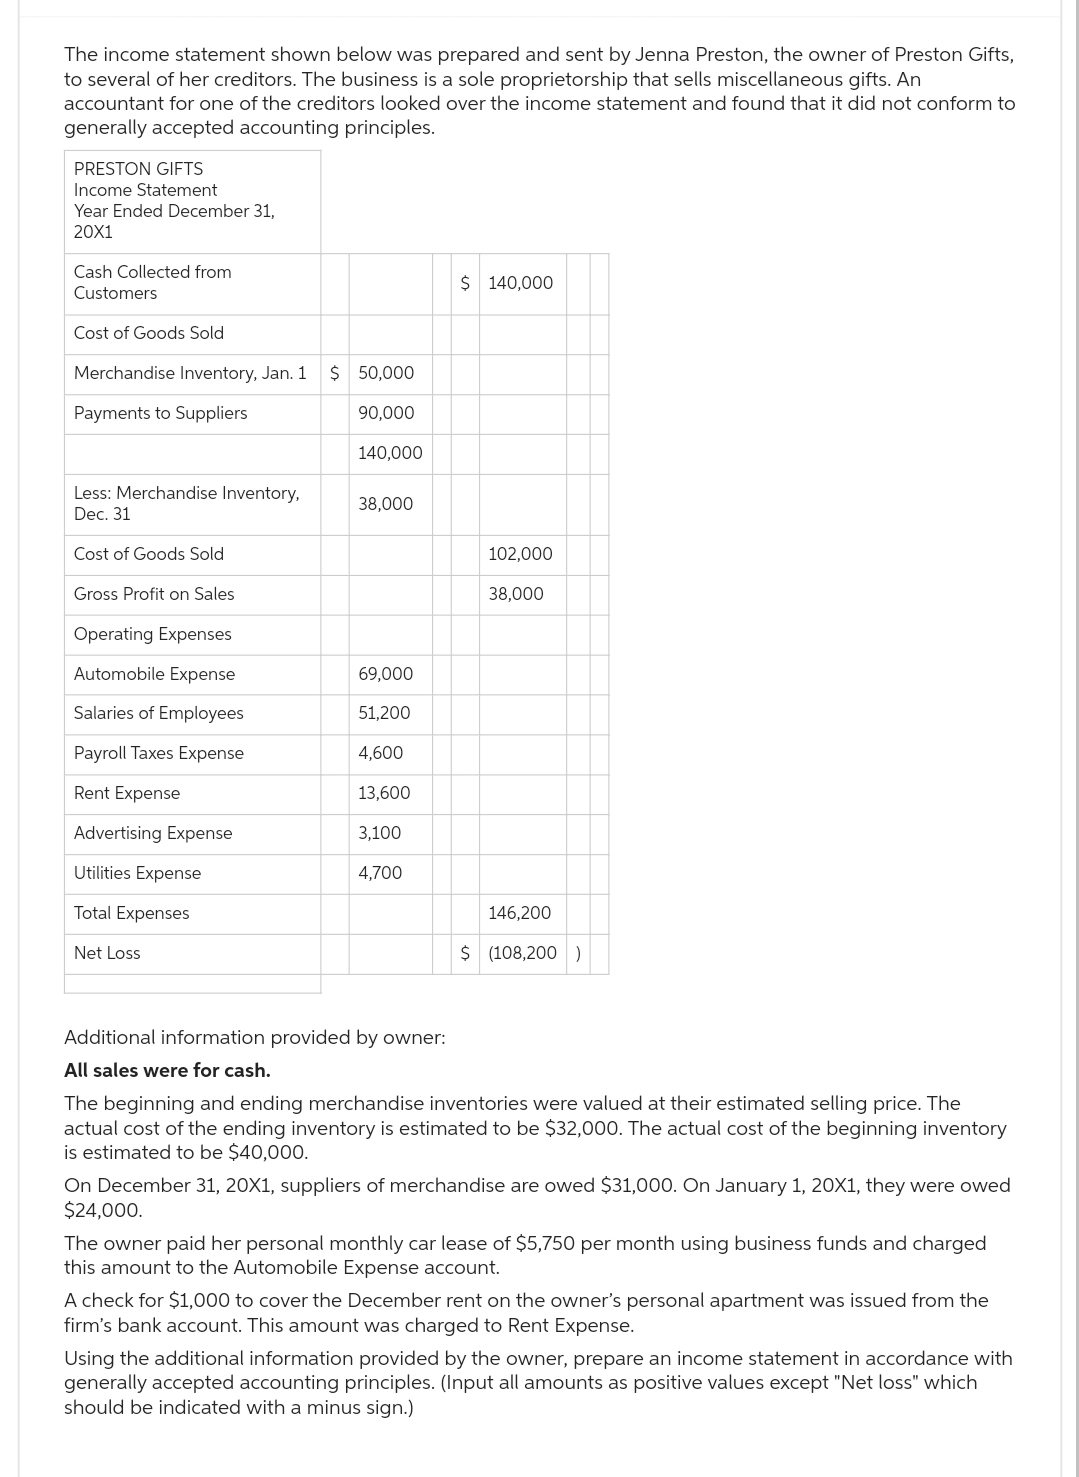 The income statement shown below was prepared and sent by Jenna Preston, the owner of Preston Gifts,
to several of her creditors. The business is a sole proprietorship that sells miscellaneous gifts. An
accountant for one of the creditors looked over the income statement and found that it did not conform to
generally accepted accounting principles.
PRESTON GIFTS
Income Statement
Year Ended December 31,
20X1
Cash Collected from
Customers
Cost of Goods Sold
Merchandise Inventory, Jan. 1
Payments to Suppliers
Less: Merchandise Inventory,
Dec. 31
Cost of Goods Sold
Gross Profit on Sales
Operating Expenses
Automobile Expense
Salaries of Employees
Payroll Taxes Expense
Rent Expense
Advertising Expense
Utilities Expense
Total Expenses
Net Loss
$ 50,000
90,000
140,000
38,000
69,000
51,200
4,600
13,600
3,100
4,700
$ 140,000
102,000
38,000
146,200
$ (108,200)
Additional information provided by owner:
All sales were for cash.
The beginning and ending merchandise inventories were valued at their estimated selling price. The
actual cost of the ending inventory is estimated to be $32,000. The actual cost of the beginning inventory
is estimated to be $40,000.
On December 31, 20X1, suppliers of merchandise are owed $31,000. On January 1, 20X1, they were owed
$24,000.
The owner paid her personal monthly car lease of $5,750 per month using business funds and charged
this amount to the Automobile Expense account.
A check for $1,000 to cover the December rent on the owner's personal apartment was issued from the
firm's bank account. This amount was charged to Rent Expense.
Using the additional information provided by the owner, prepare an income statement in accordance with
generally accepted accounting principles. (Input all amounts as positive values except "Net loss" which
should be indicated with a minus sign.)